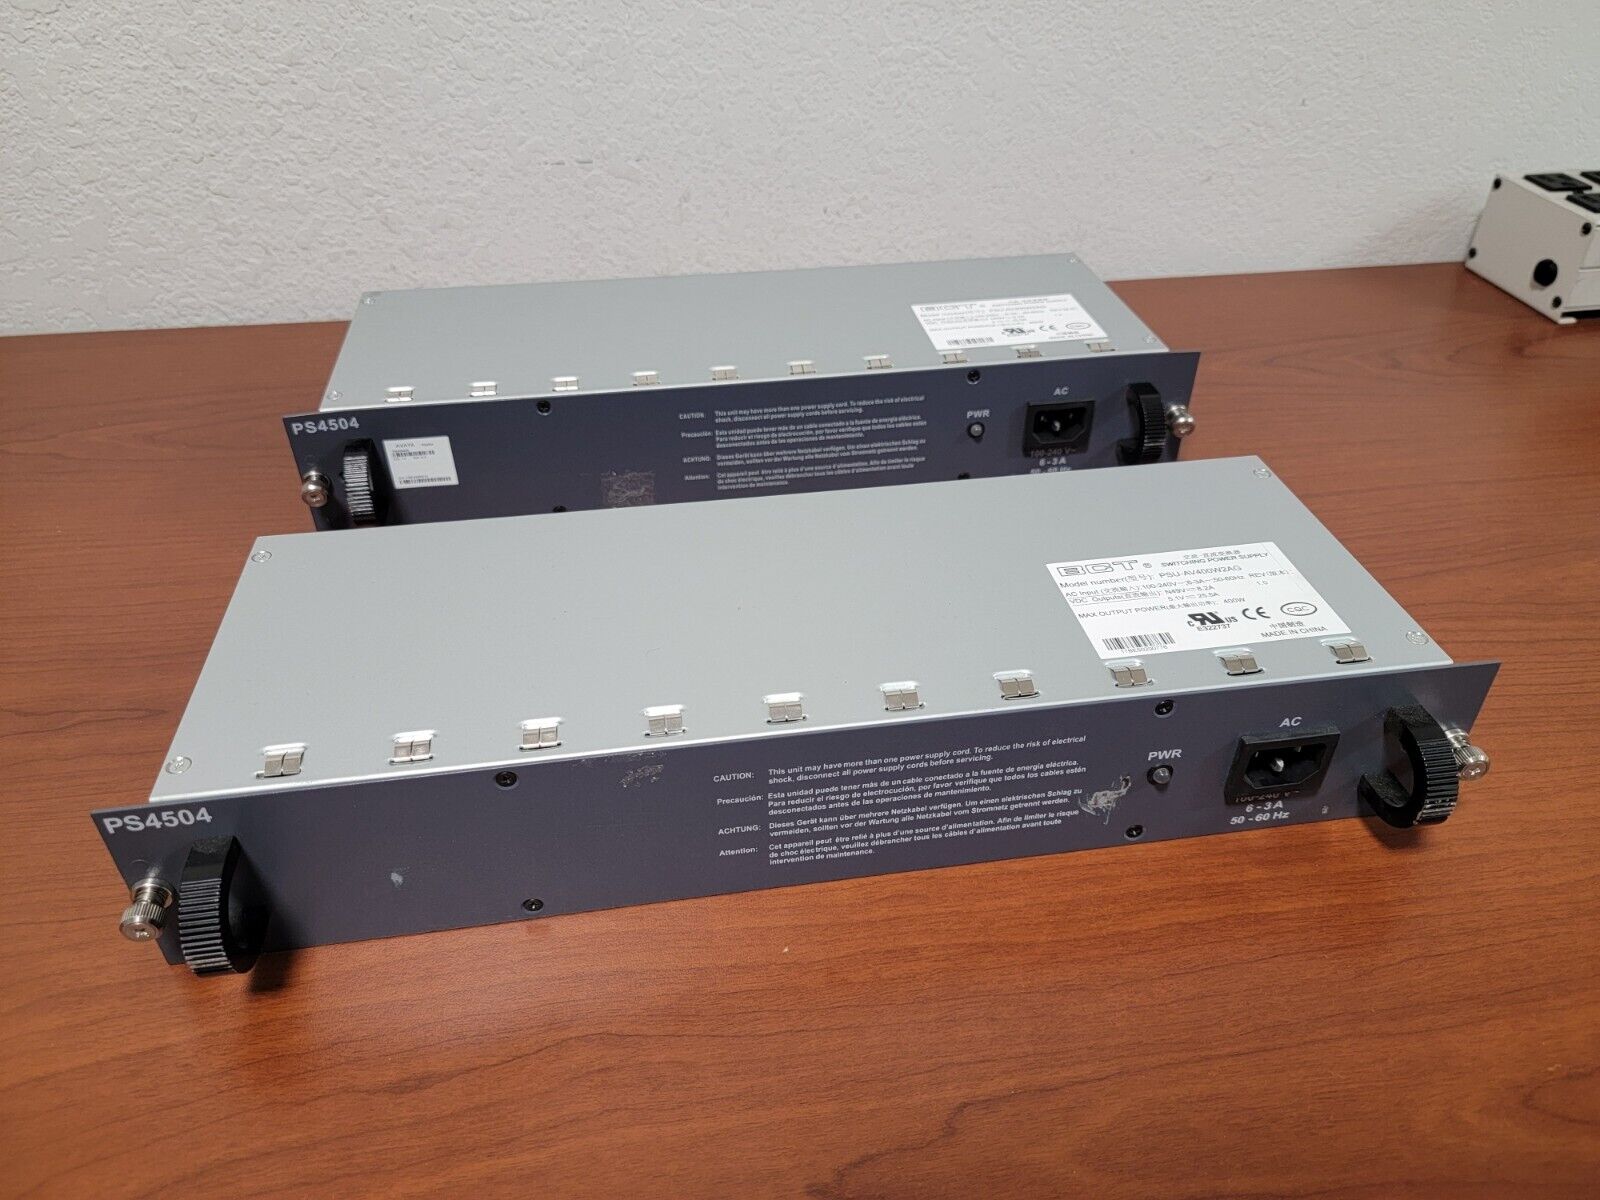 2x Lot BCT PS4504 400W Switching Power Supply for G450 Media Gateway - TESTED